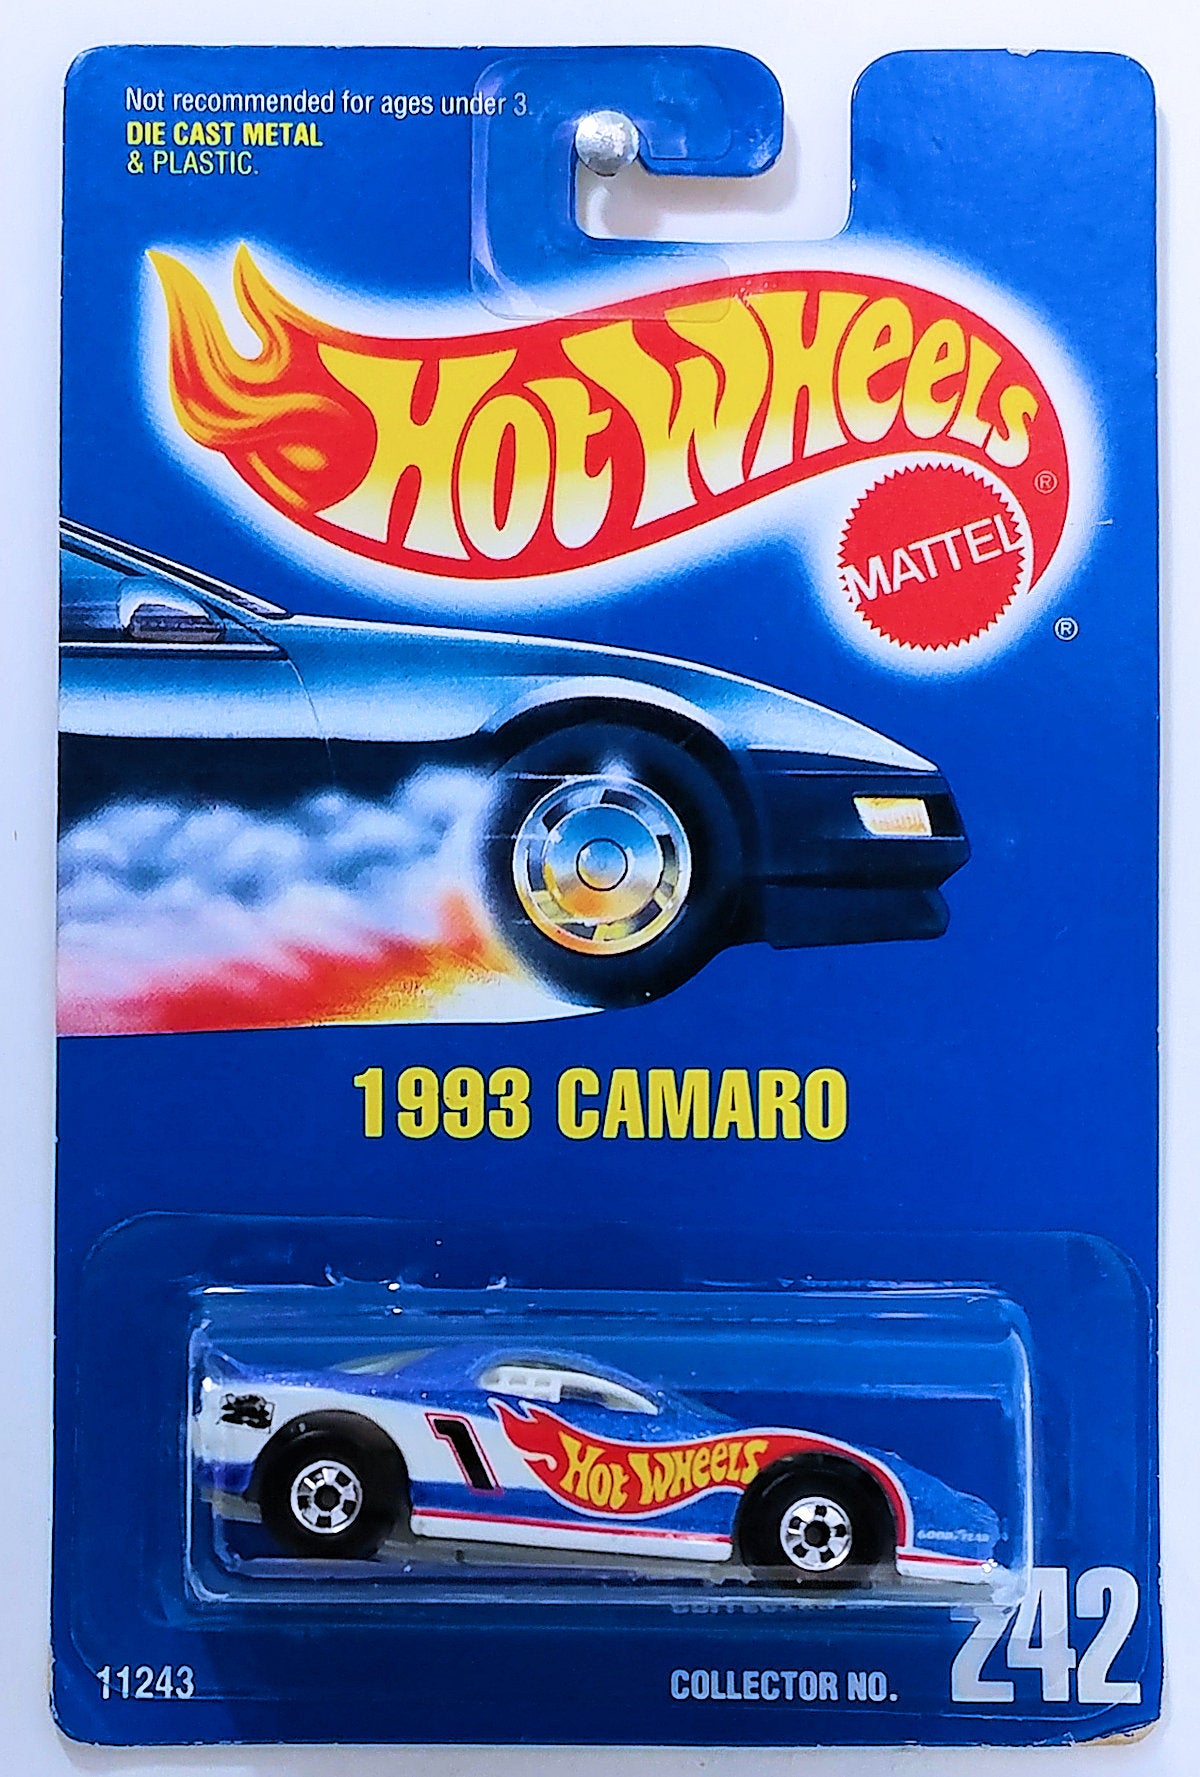 Hot Wheels 1994 - Collector # 242 - 1993 Camaro - Metalflake Blue - BW Wheels - Short Exhaust - White Interior - Name on Roof